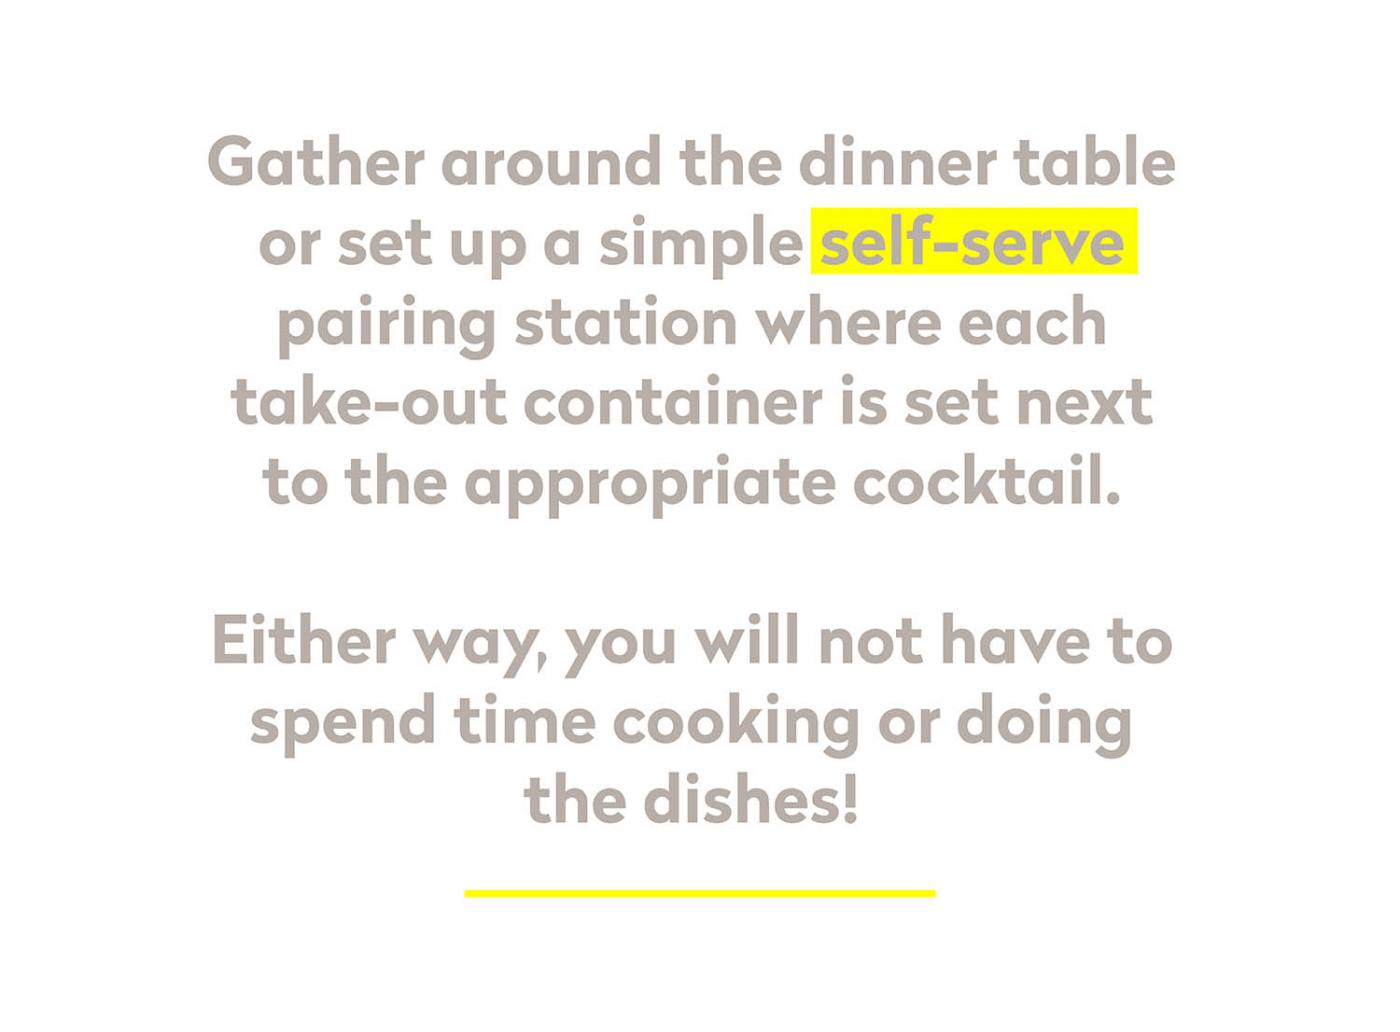 gather around the dinner table or set up a simple self-serve pairing station 